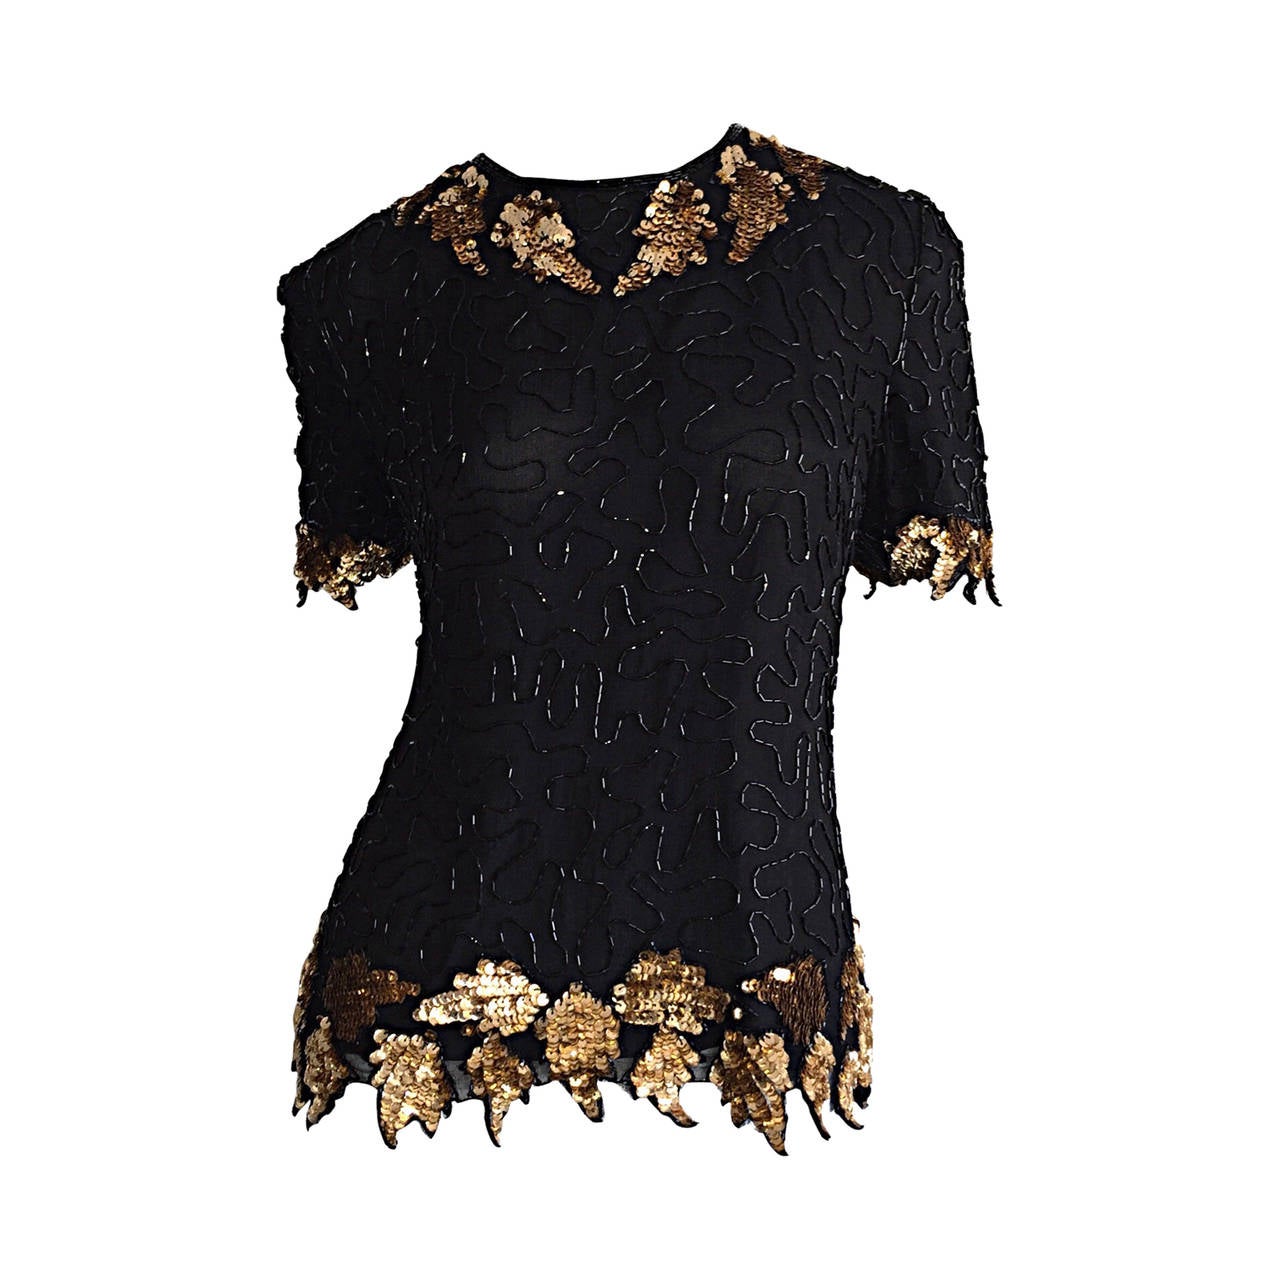 Beautiful Vintage Black + Gold Silk Beaded Scalloped Sequin Blouse Top